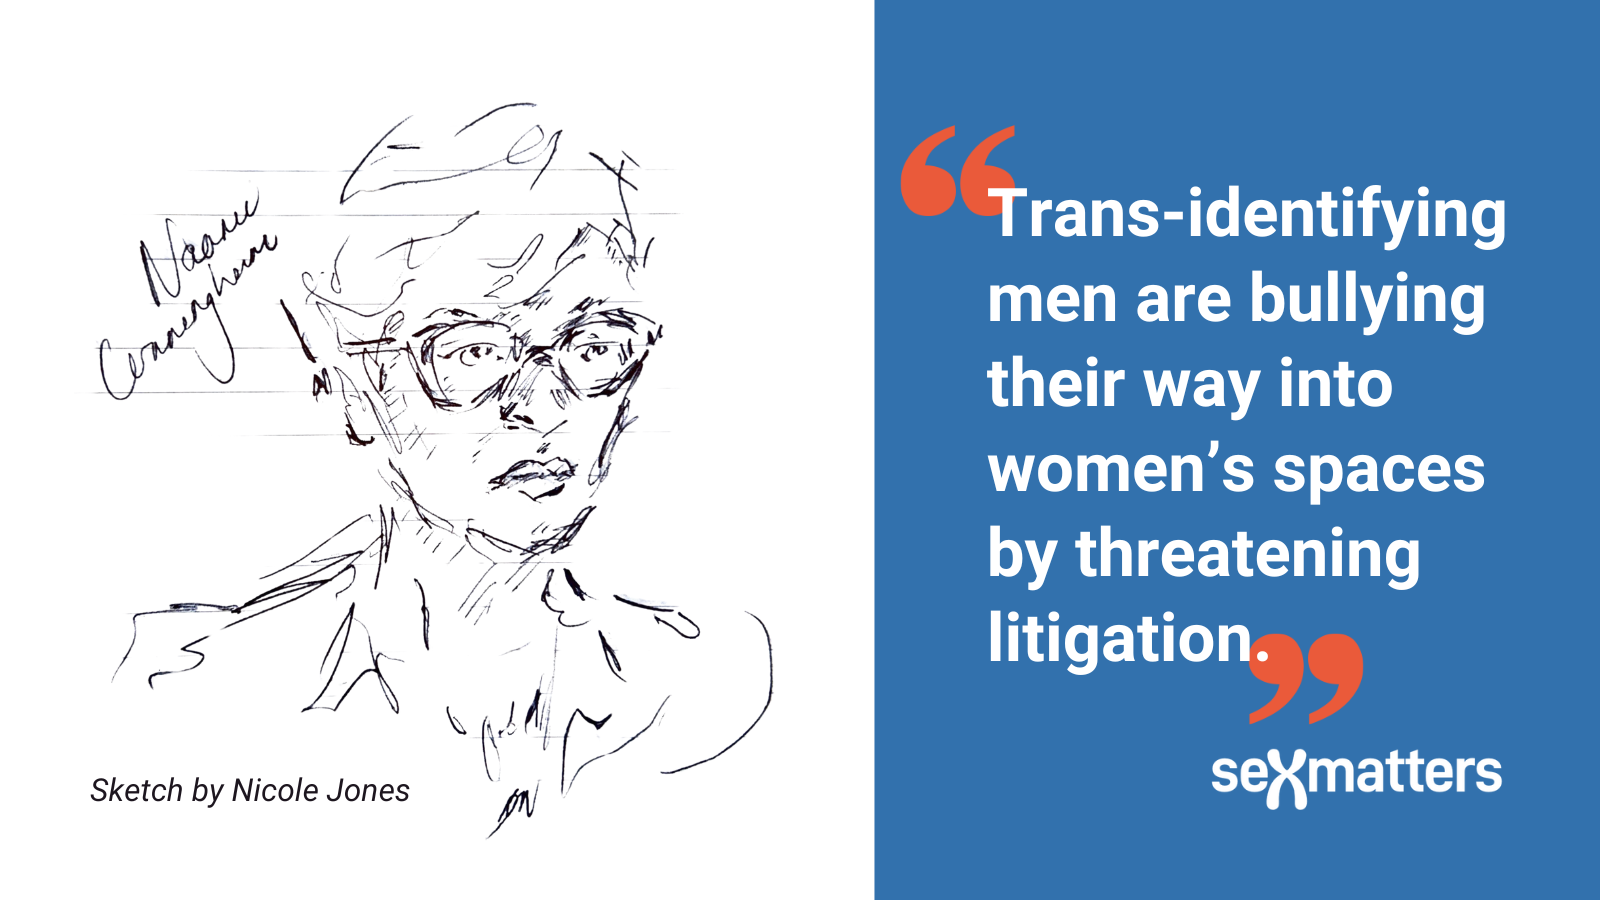 Trans-identifying men are bullying their way into women’s spaces by threatening litigation.